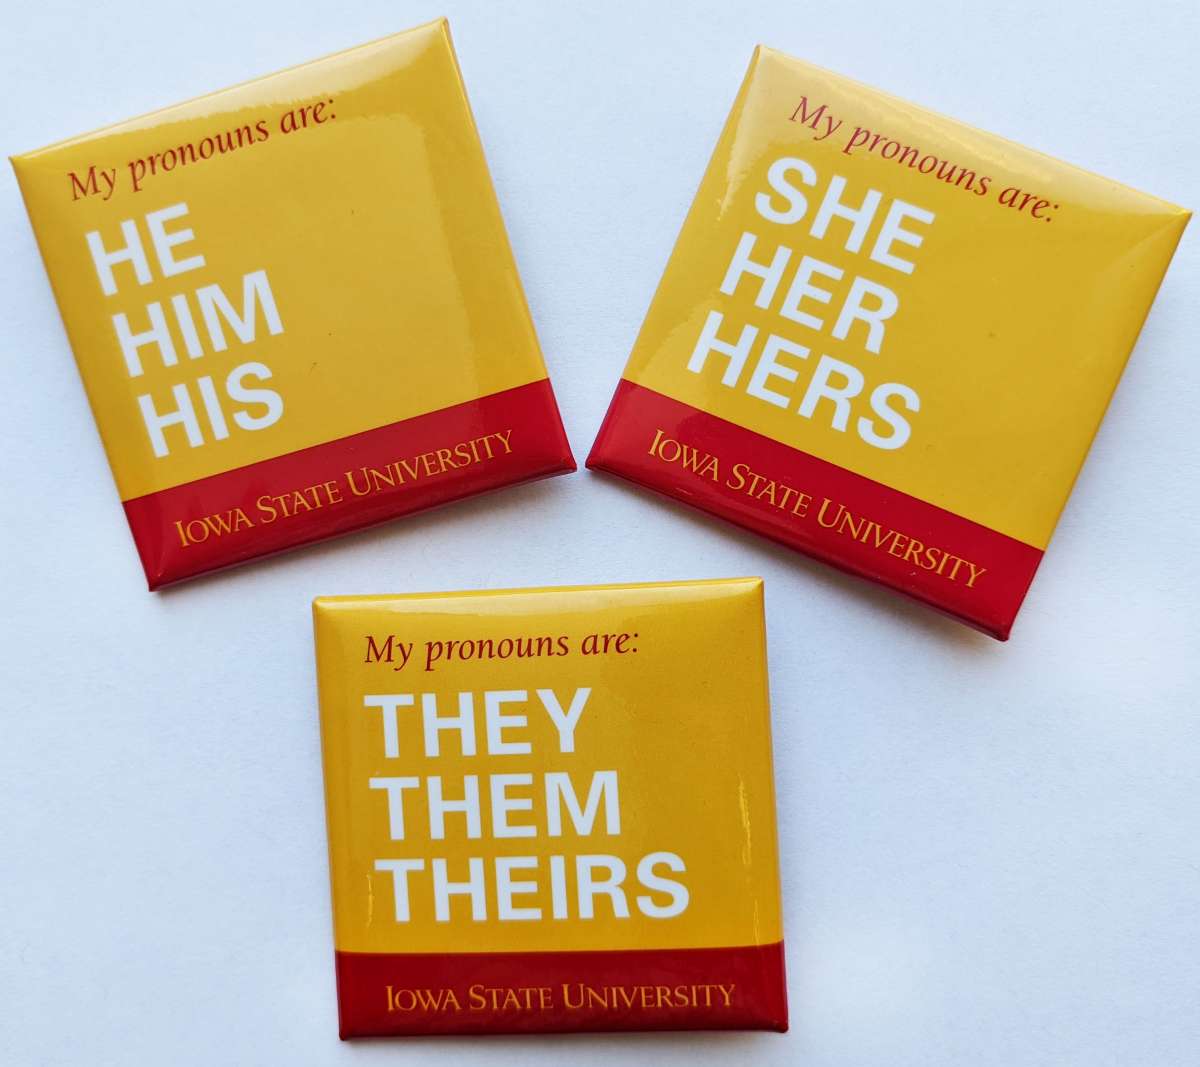 Pronoun buttons reading he him his, she her hers, and they them, theirs.